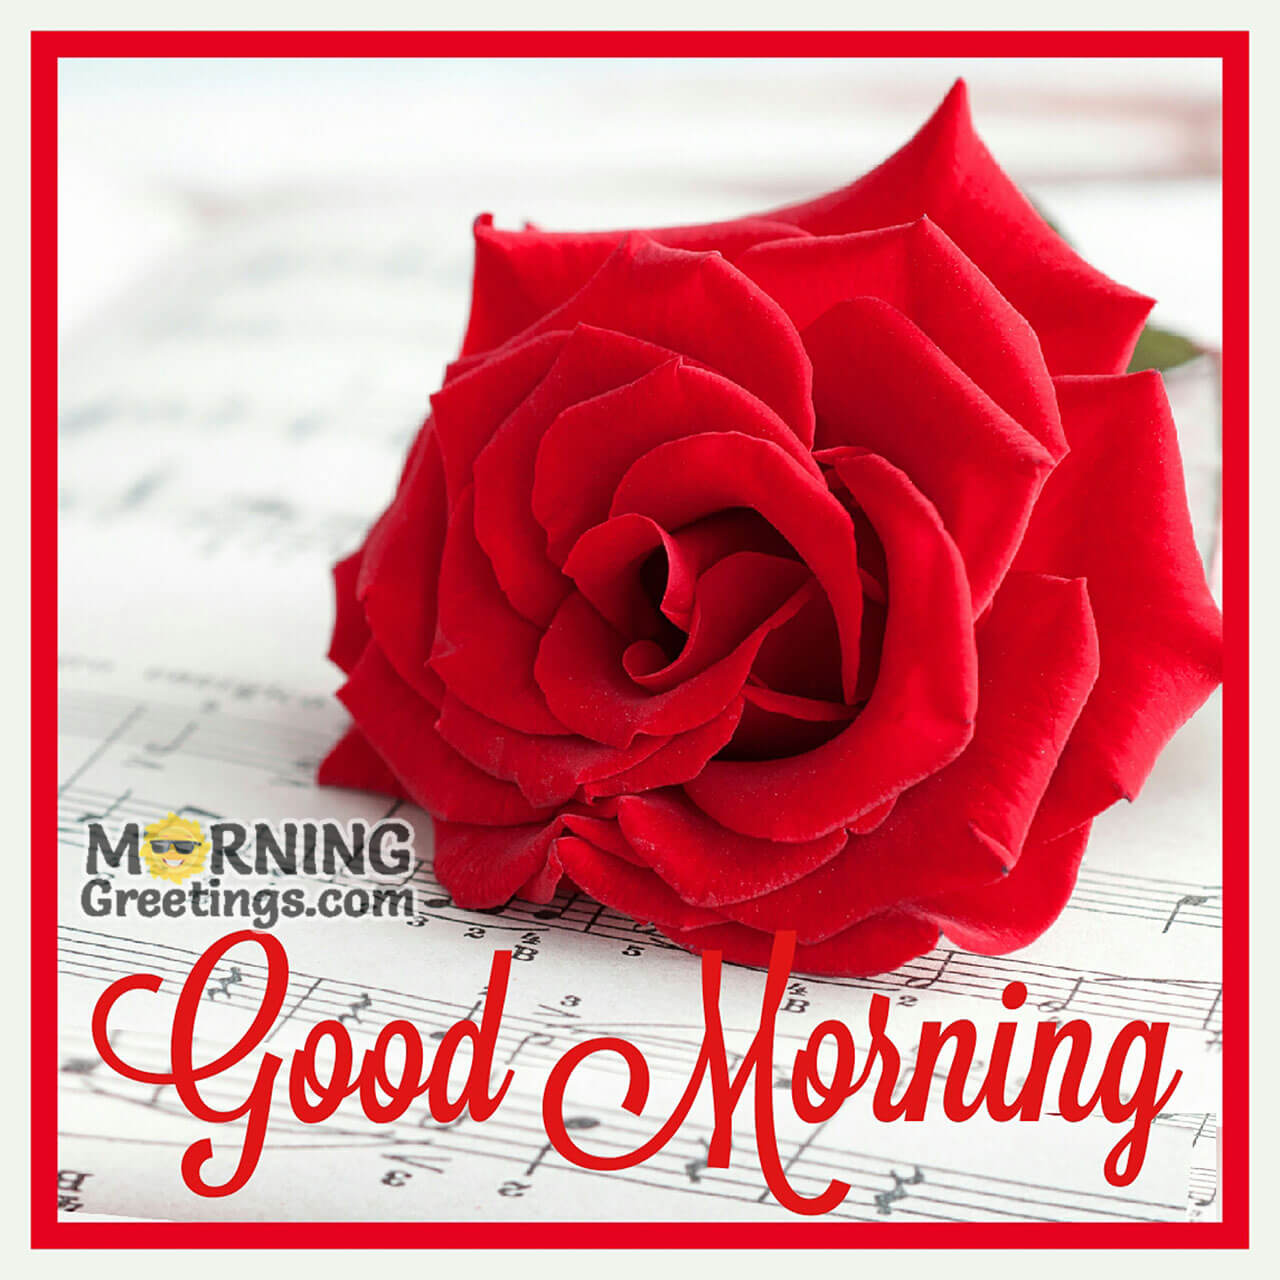 morning wishes with roses